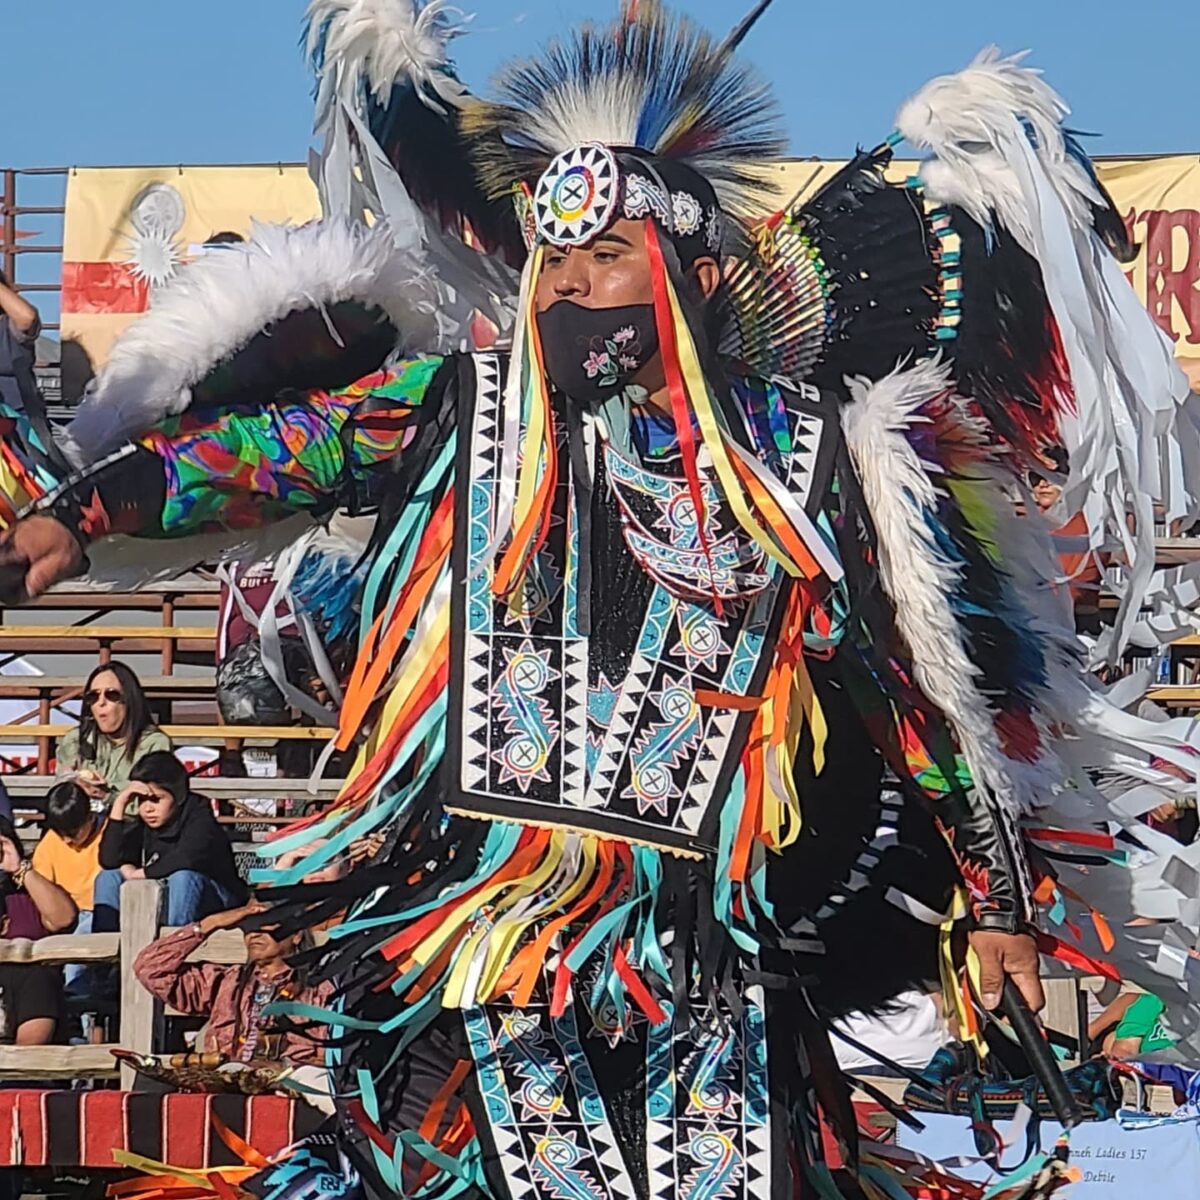 33rd Annual Native American Indian Pow Wow 2023 at Traders Village Houston